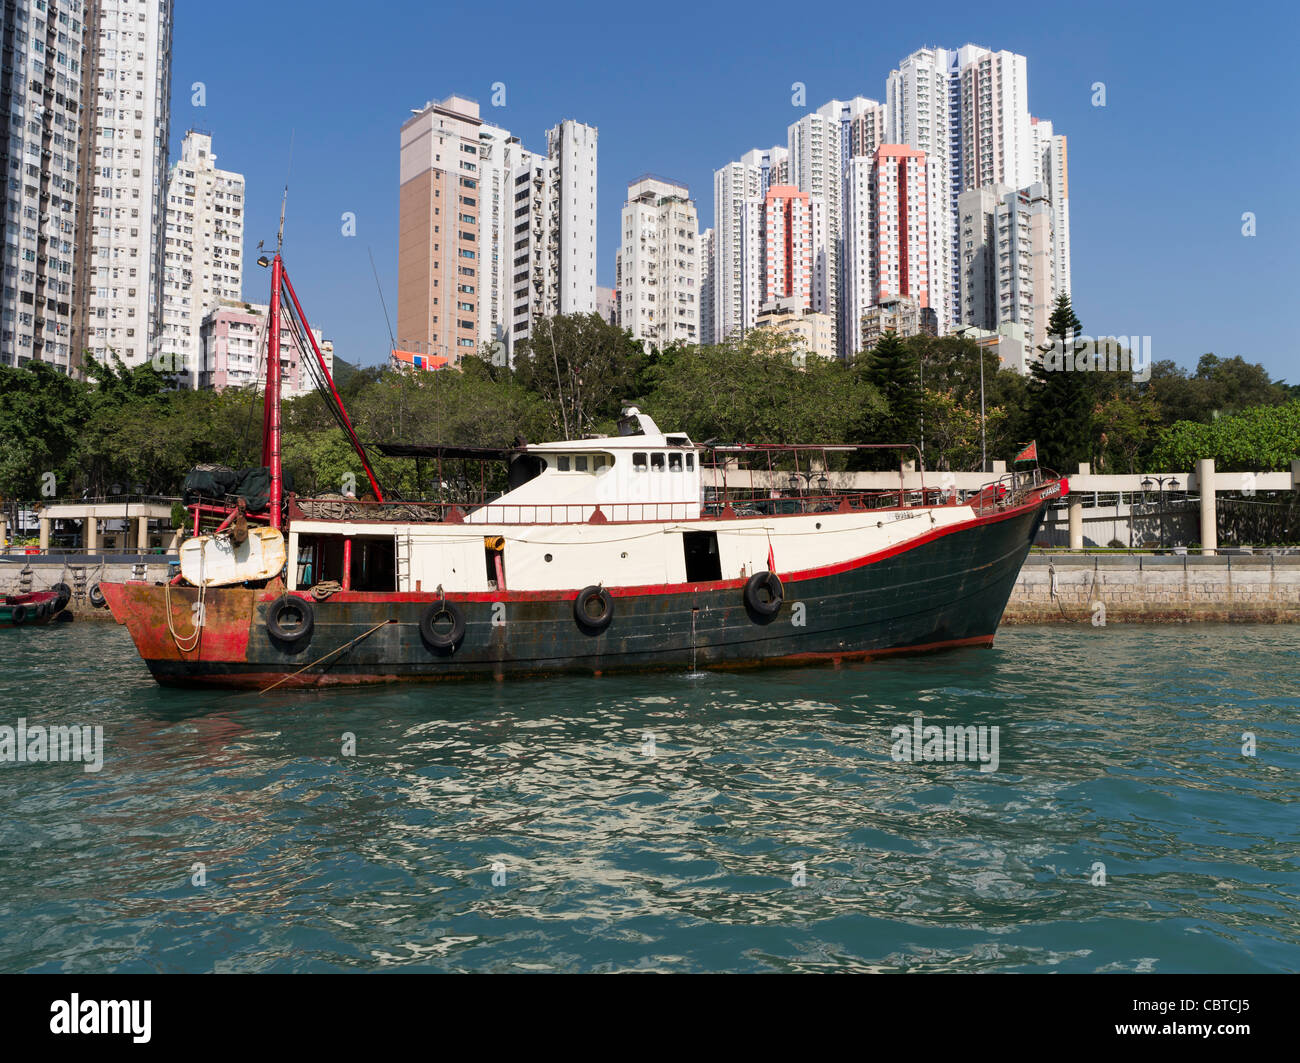 dh Harbour boat ABERDEEN HONG KONG Fishing Junk in anchorage high rise residential flats boat chinese china east deep sea vessel boats Stock Photo